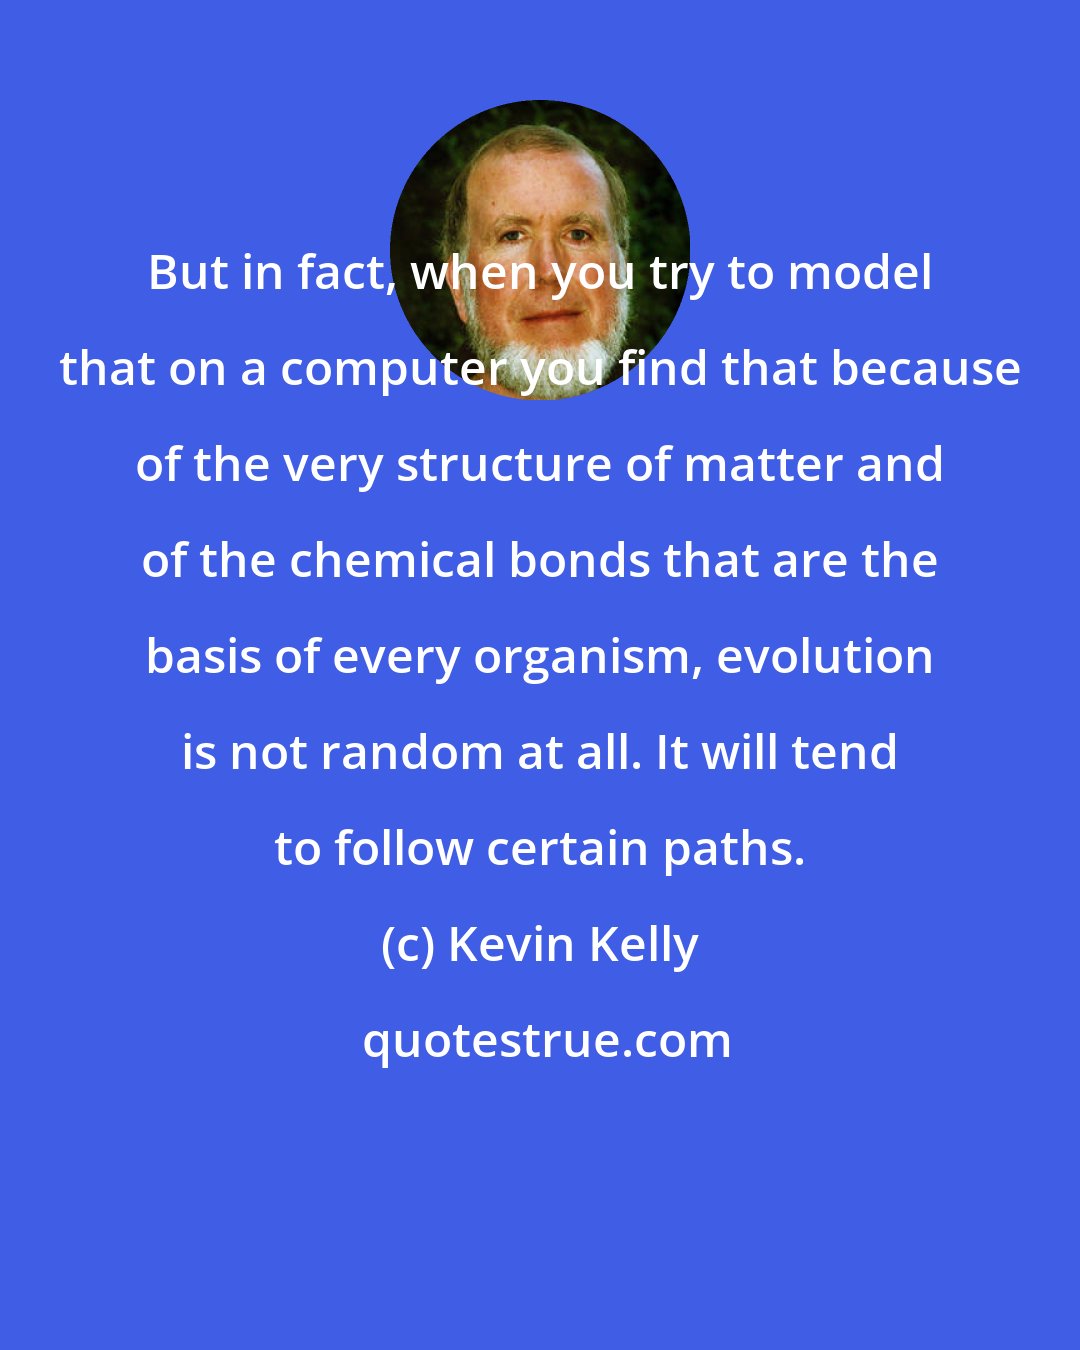 Kevin Kelly: But in fact, when you try to model that on a computer you find that because of the very structure of matter and of the chemical bonds that are the basis of every organism, evolution is not random at all. It will tend to follow certain paths.